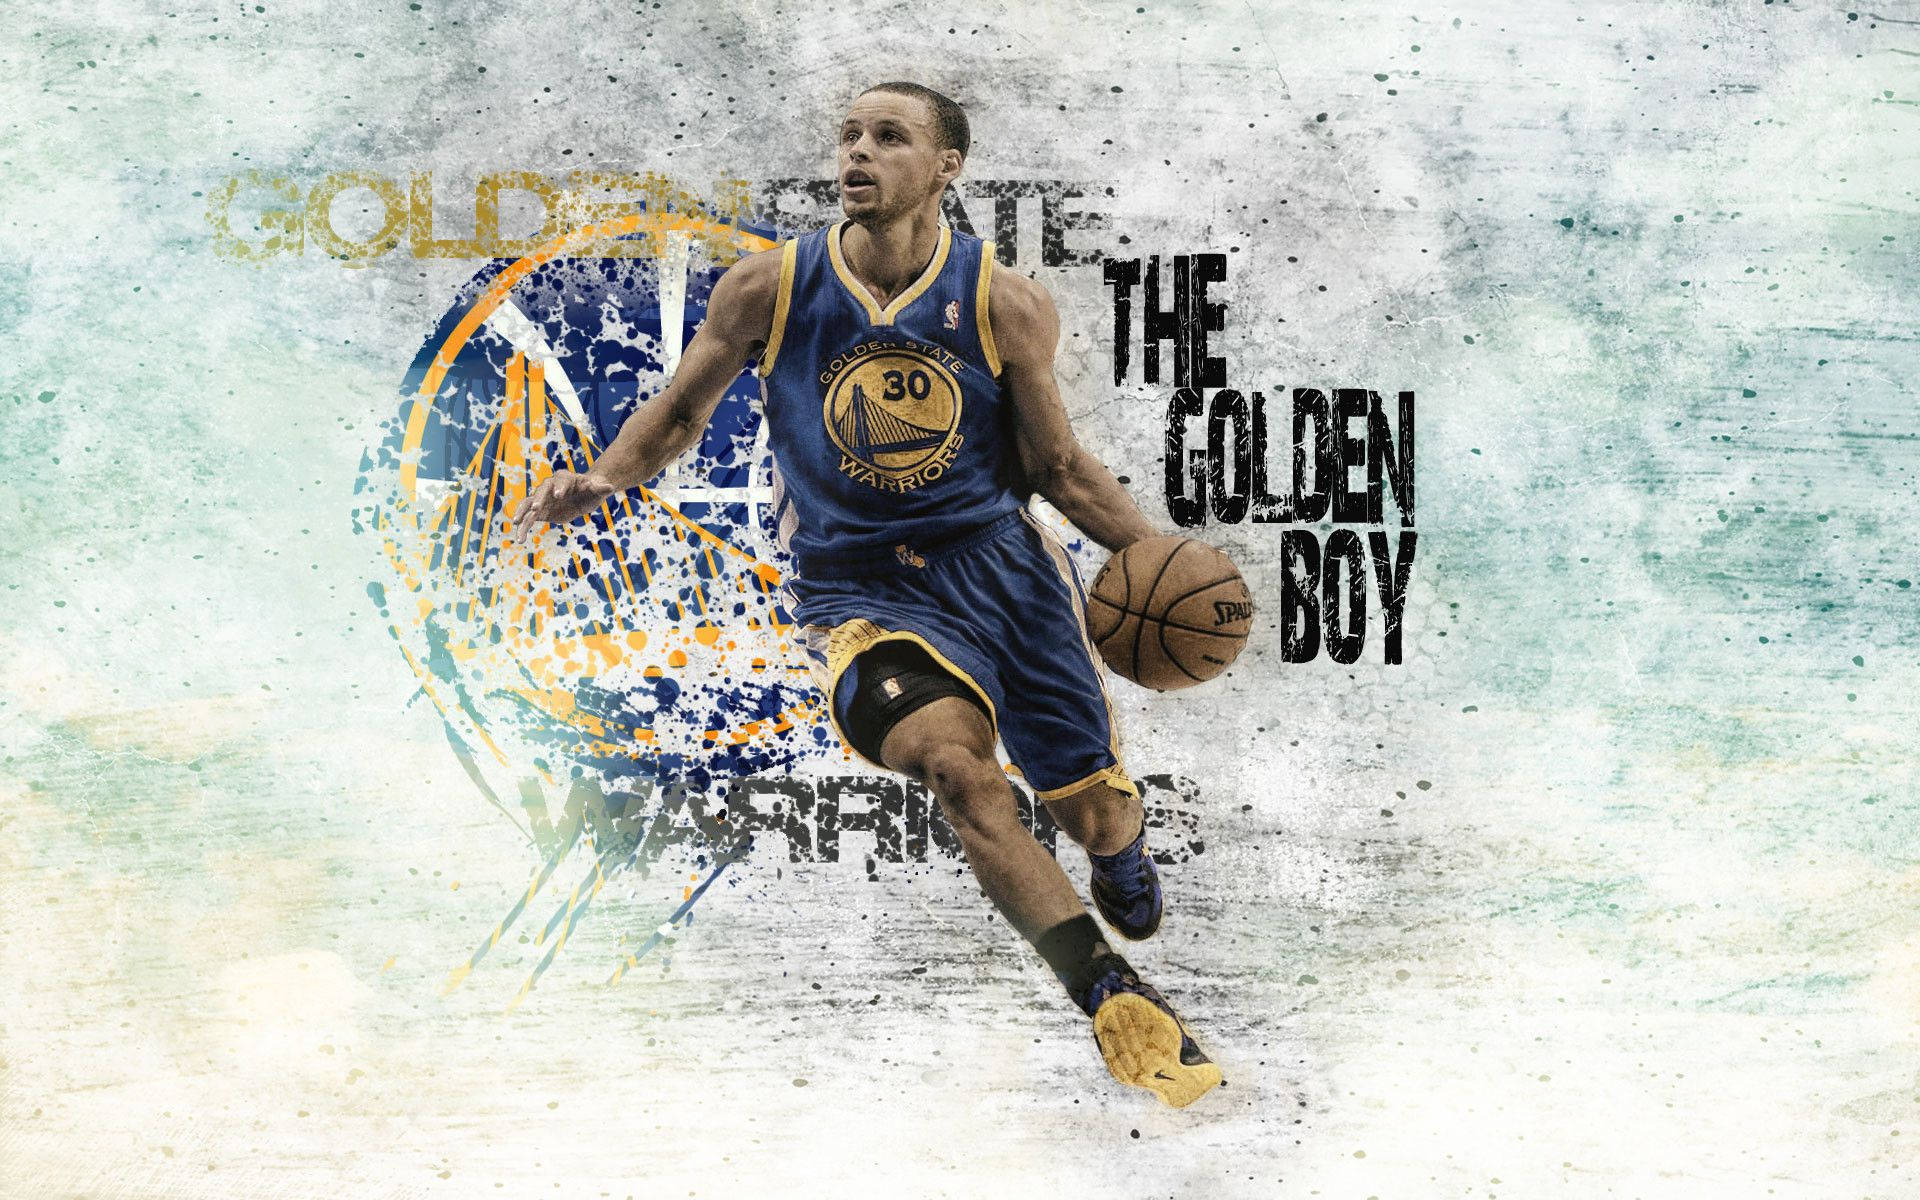 Stephen Curry wallpaper  Stephen curry basketball, Stephen curry wallpaper,  Curry wallpaper